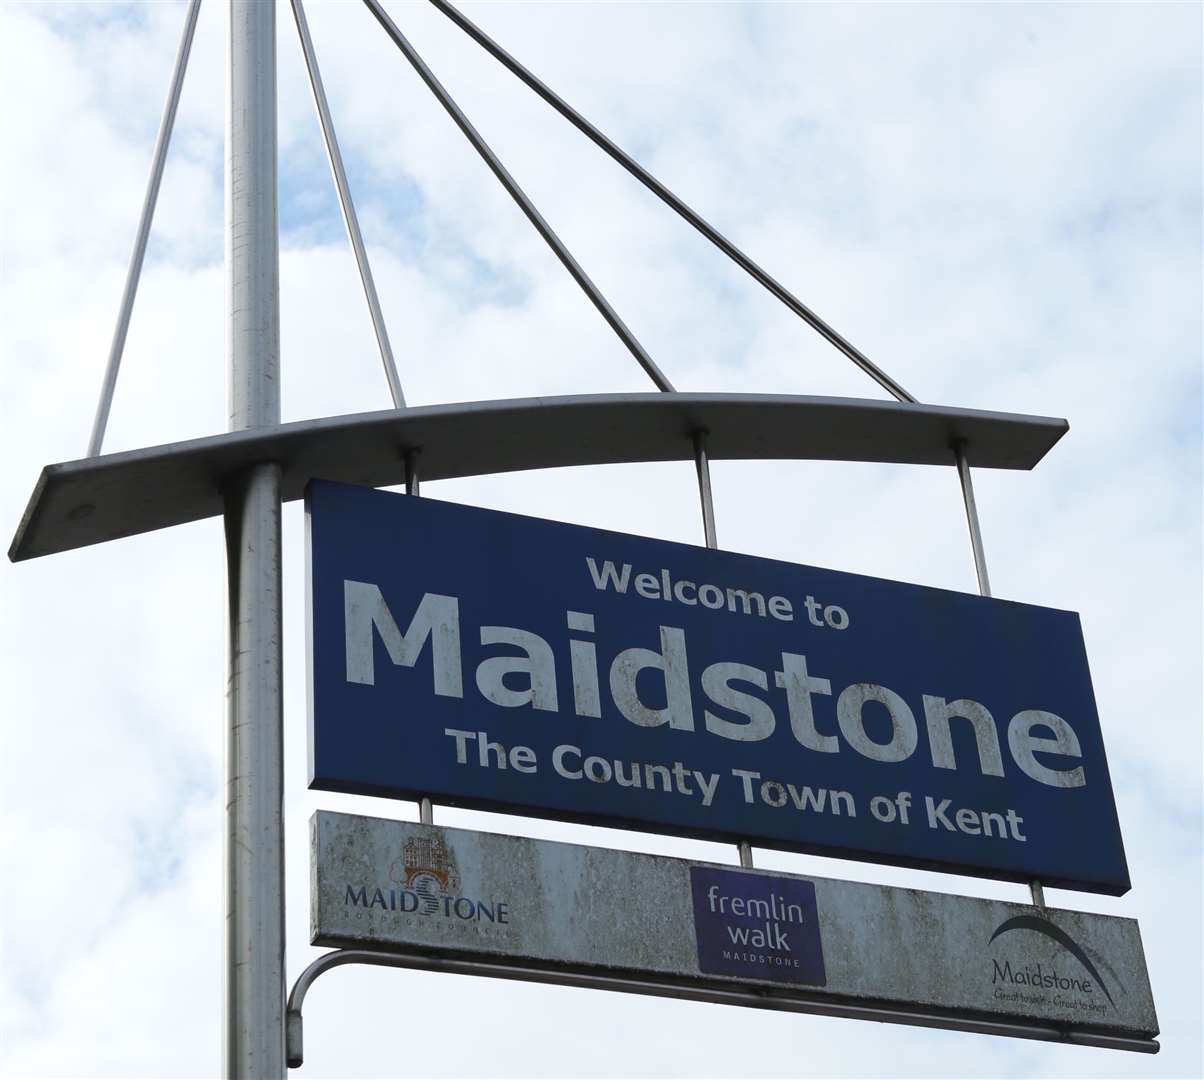 Welcome to Maidstone sign in London Road. Picture: Martin Apps